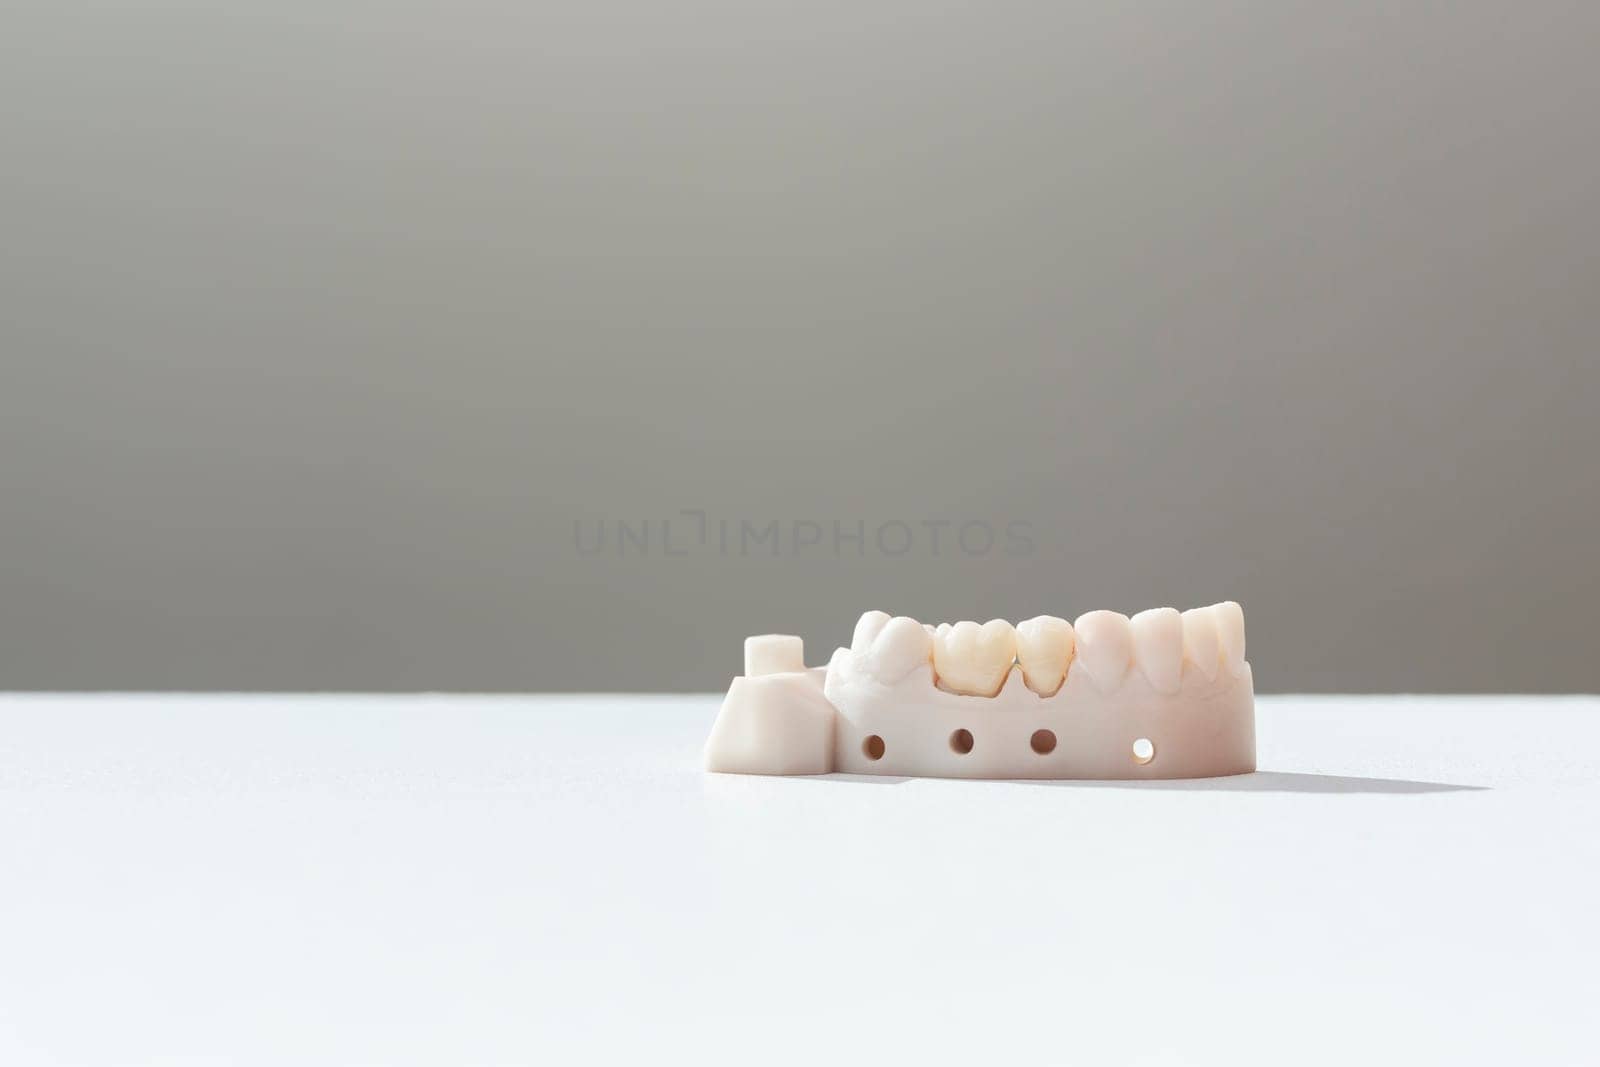 Teeth Crowns And Bridge Equipment Model Shows Fix Restoration, Prosthodontics Or Prosthetic. Inserting Or Placing Procedure Of Ceramic Dental Crown. Horizontal View, Space For Text. High quality photo